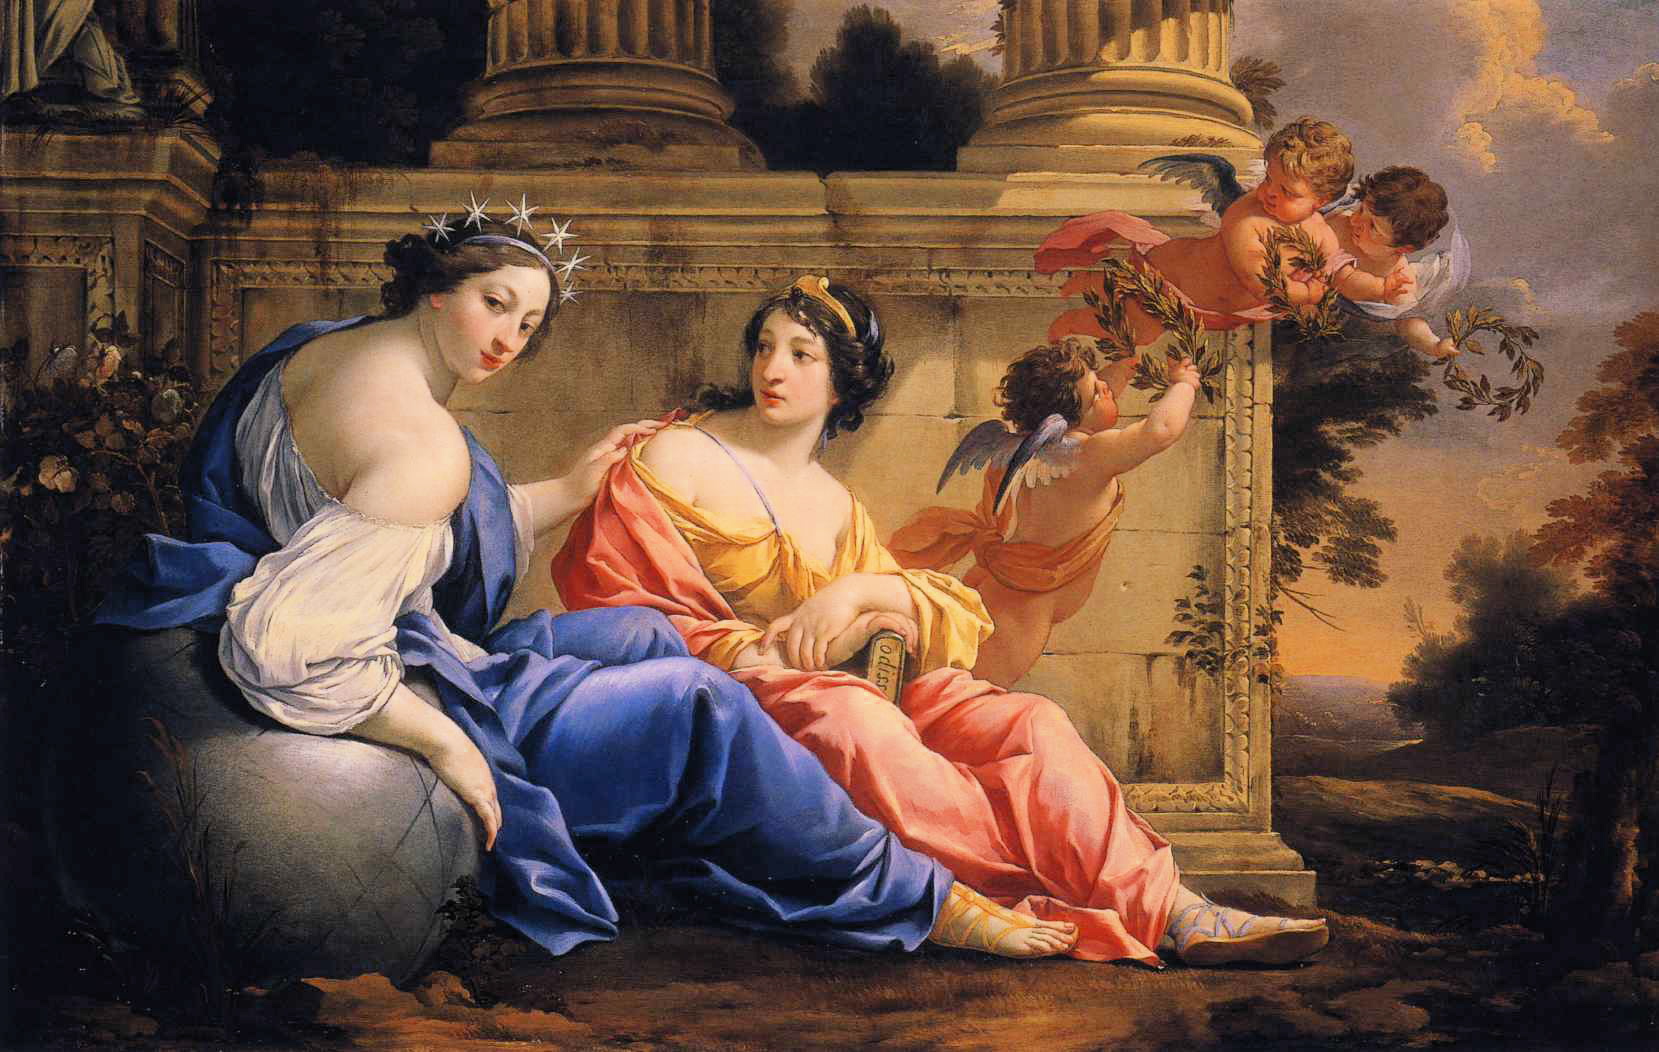 http://fr.academic.ru/pictures/frwiki/83/Simon_Vouet_-_The_Muses_Urania_and_Calliope.JPG